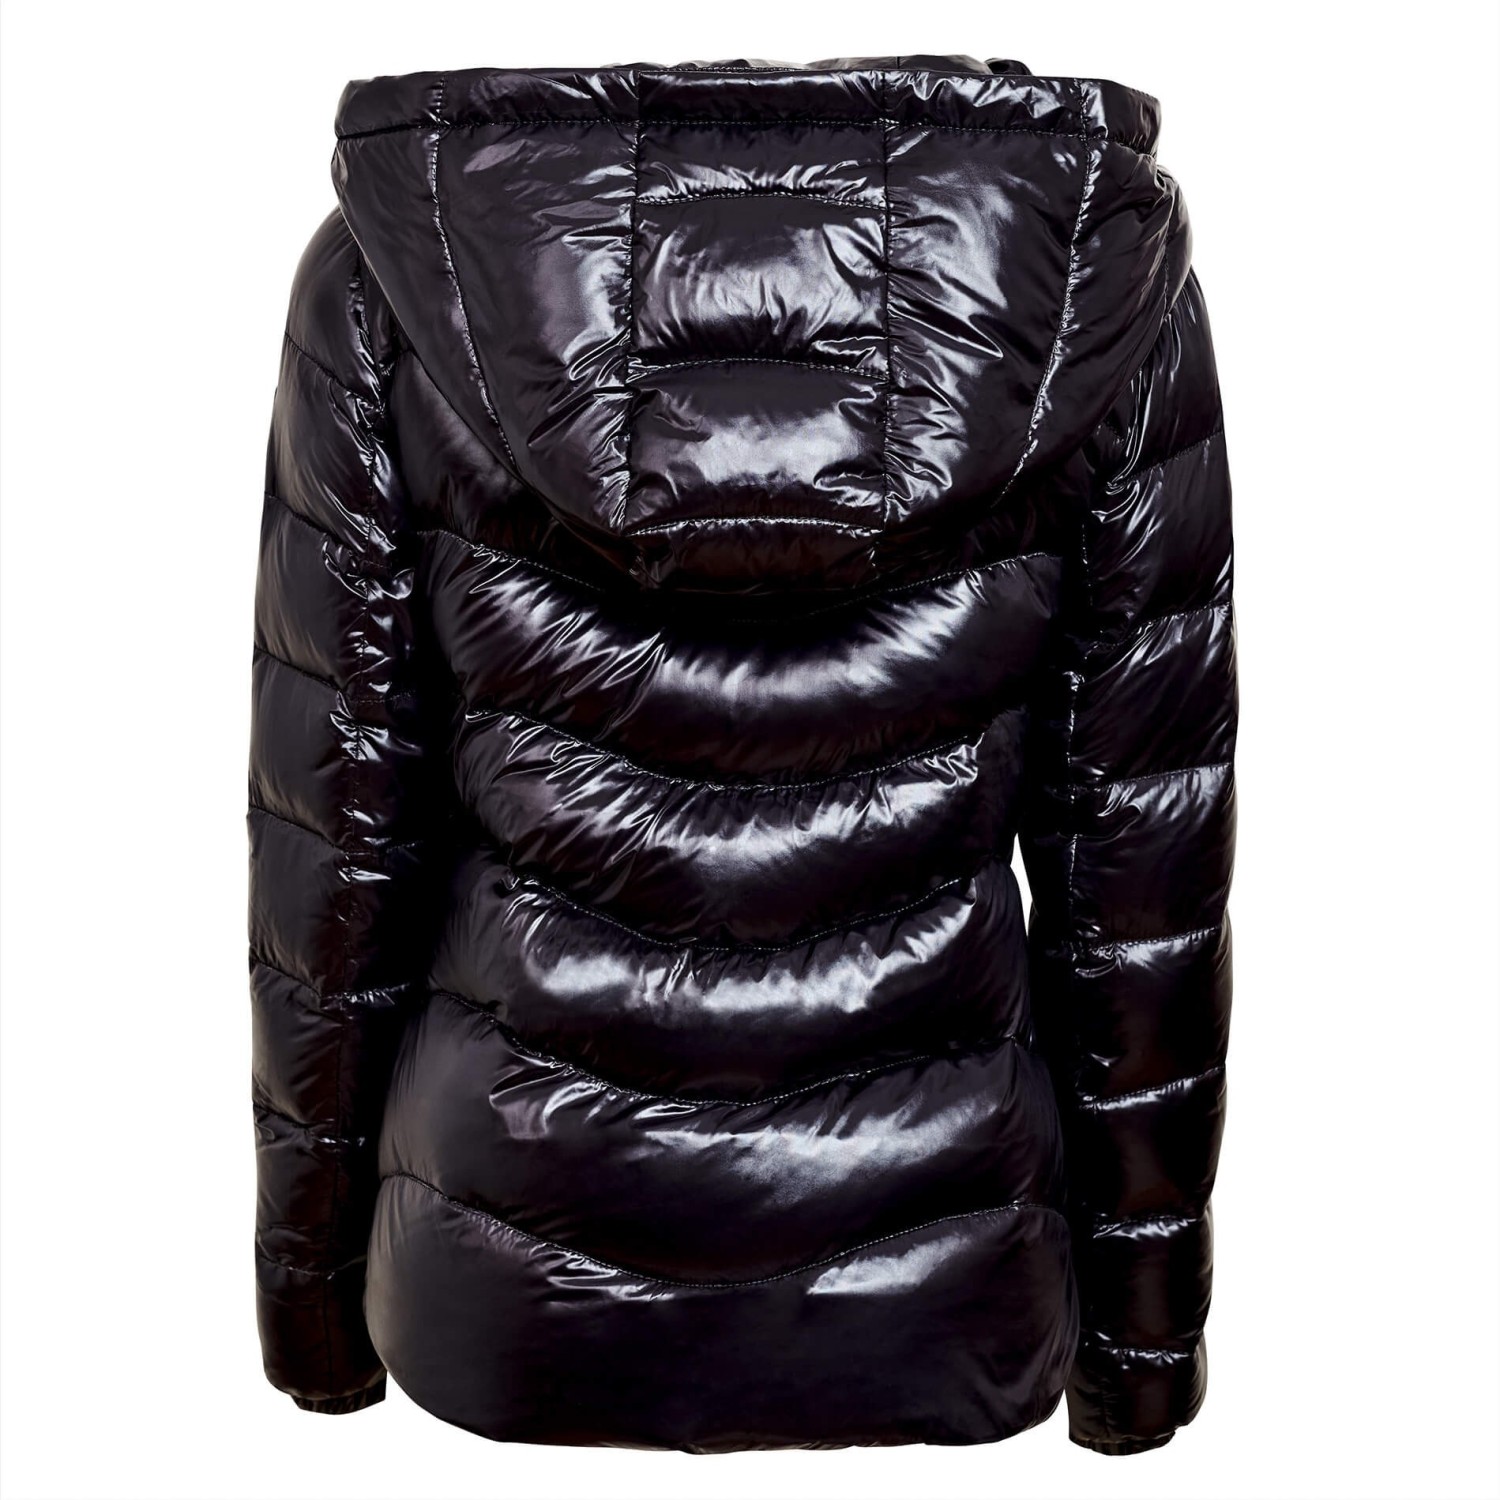 Down jacket with fake fur